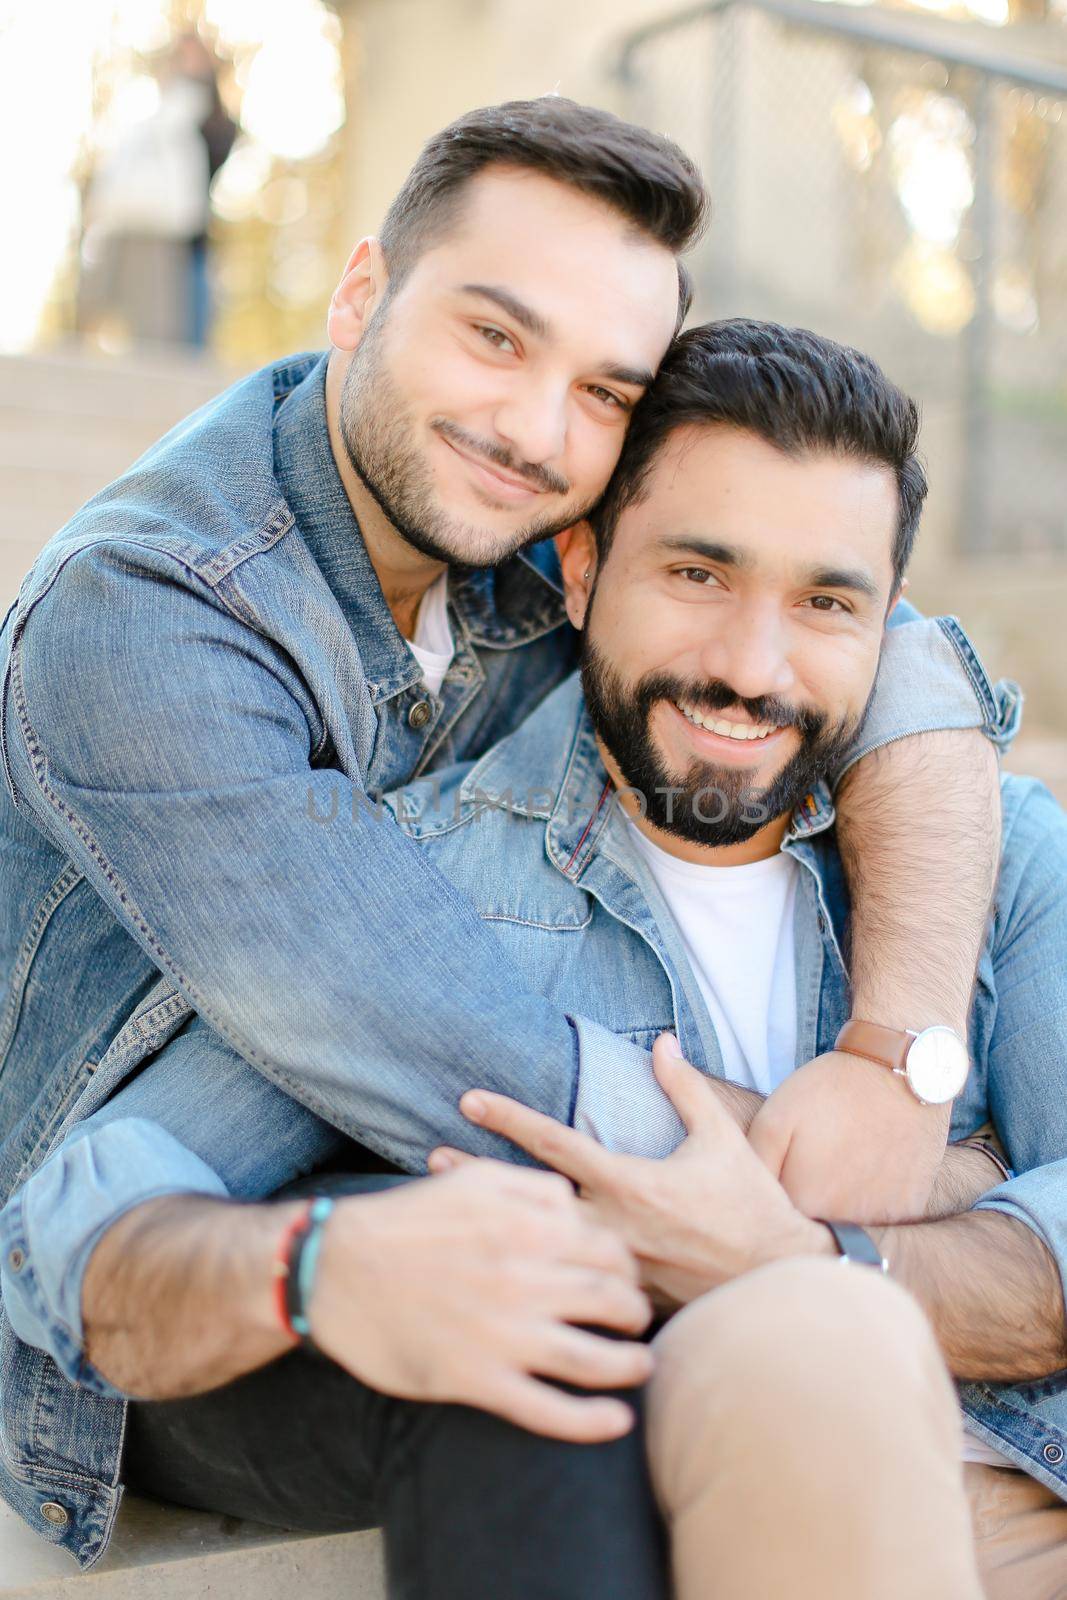 Caucasian young happy gays hugging and wearing jeans shirts. Concept of same sex couple and relationship.